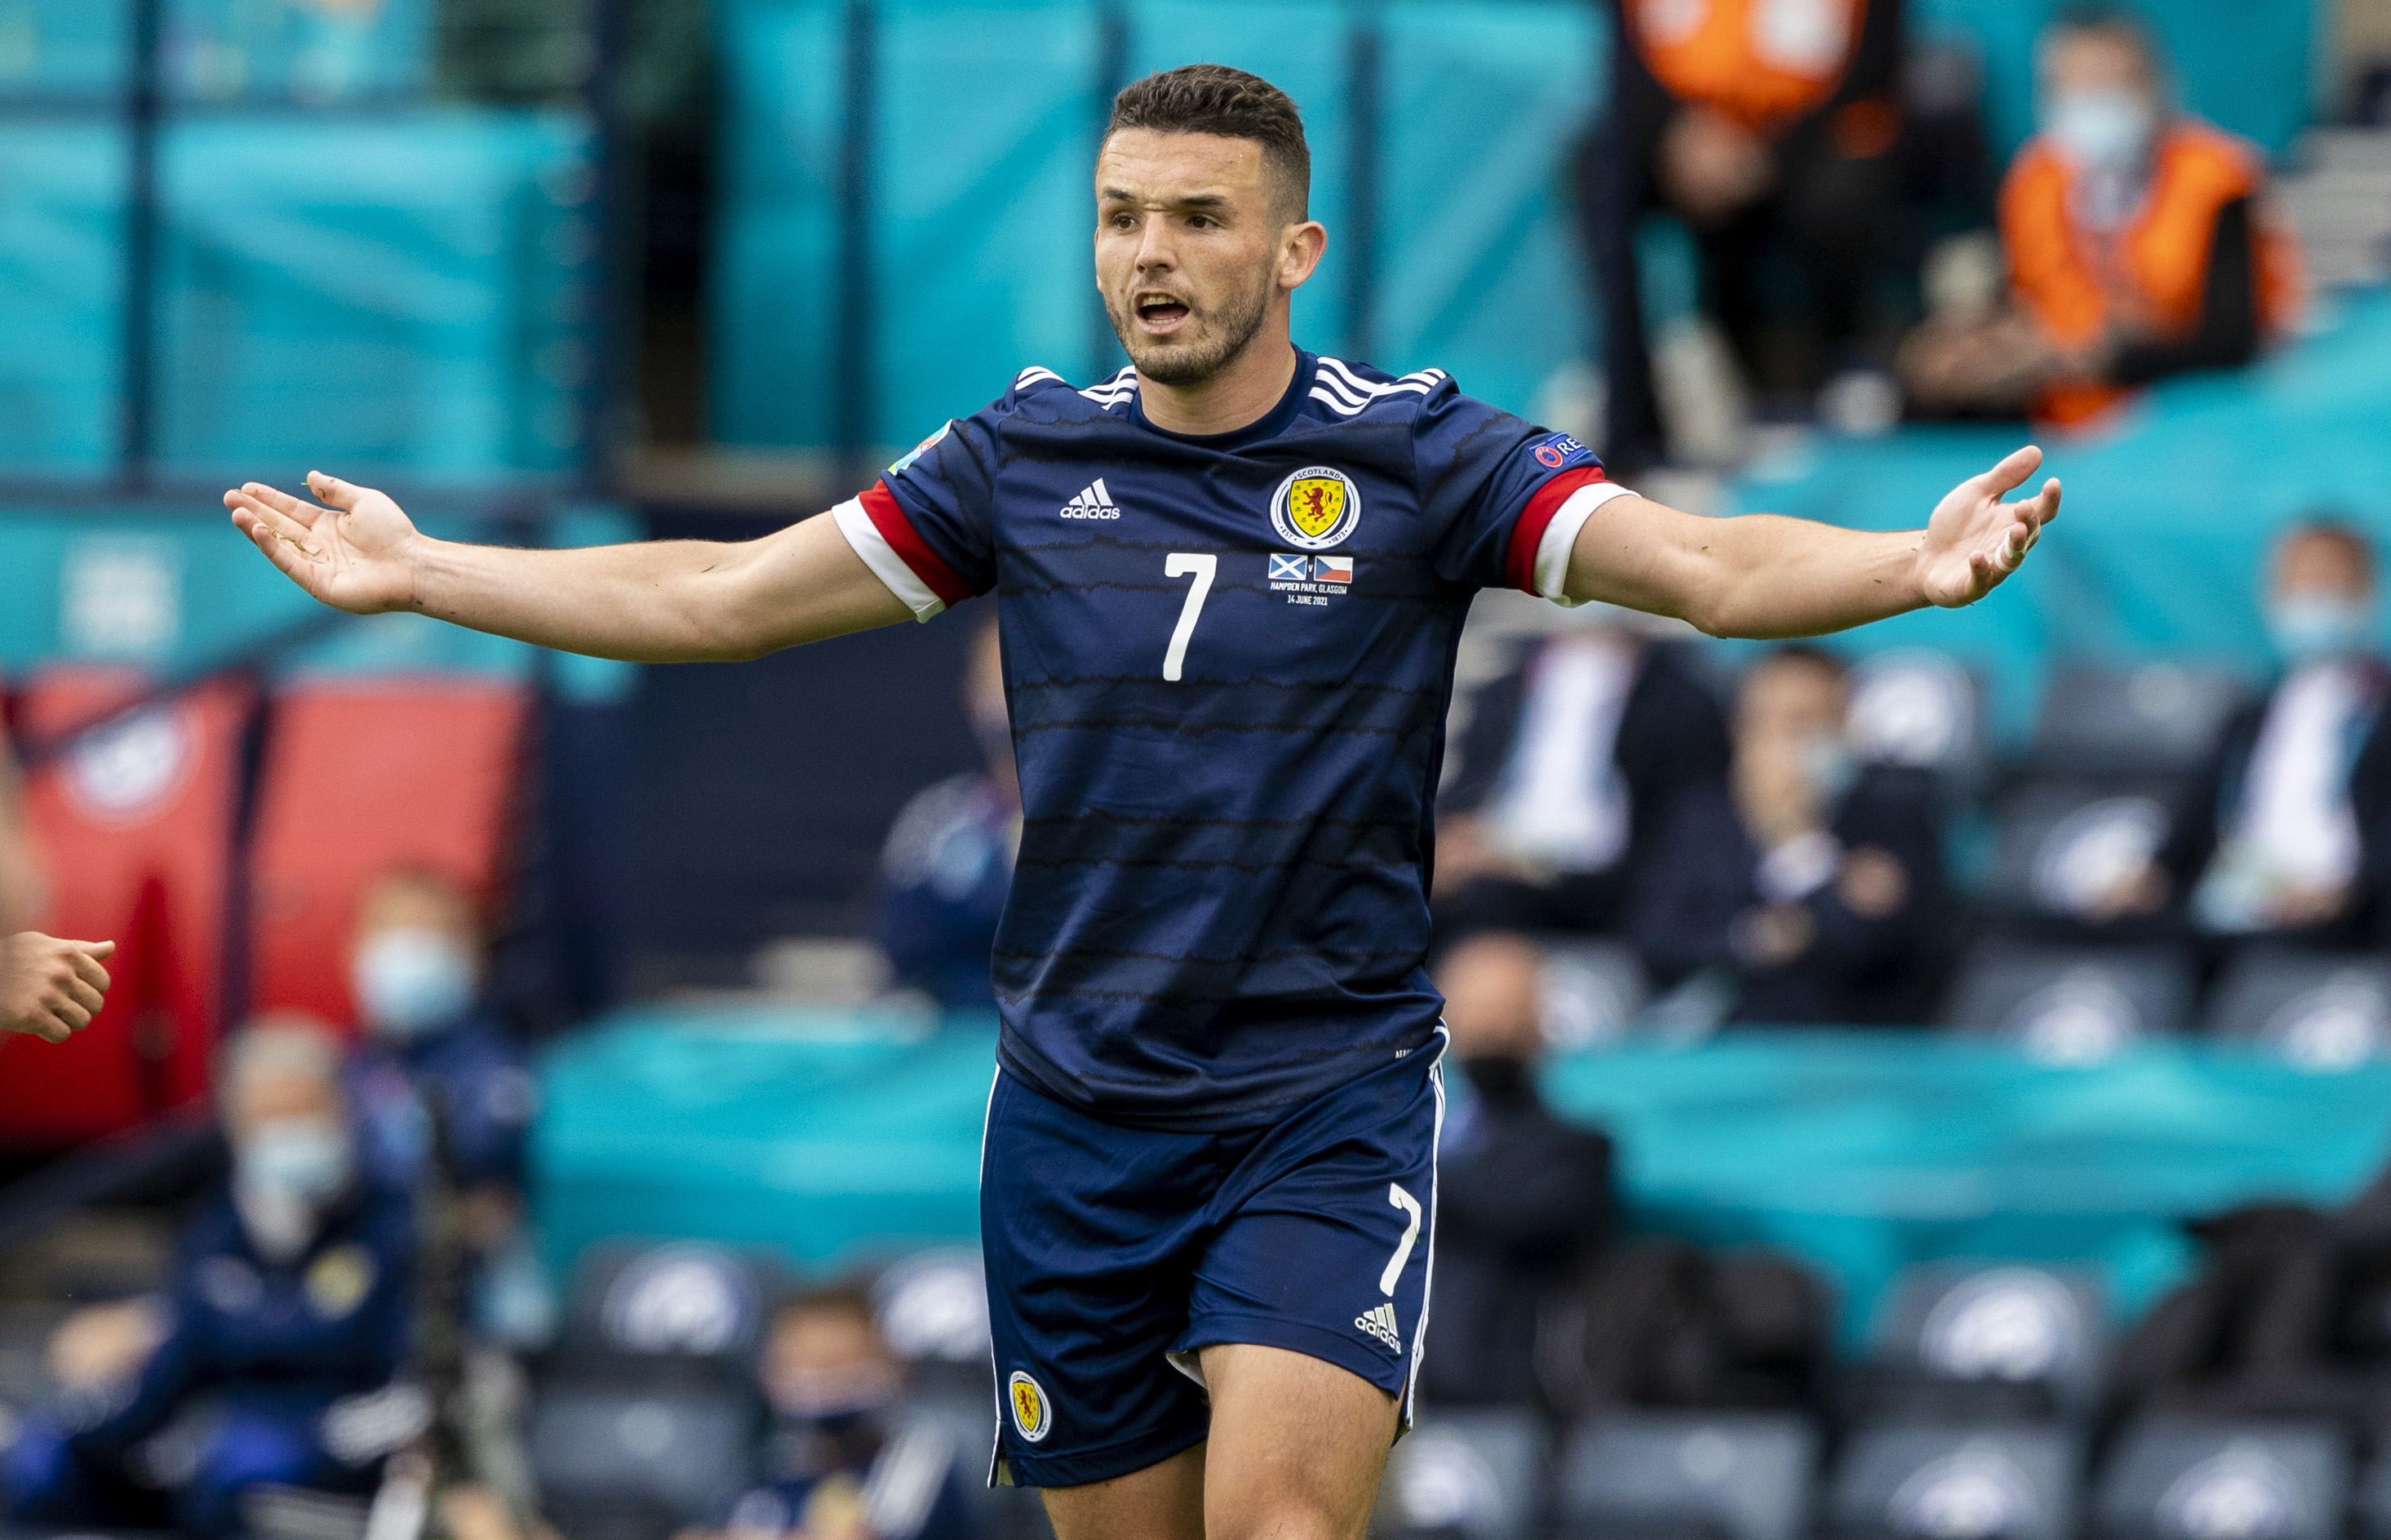 Moyes believes Scotland's midfielders, such as John McGinn, can make a big difference.